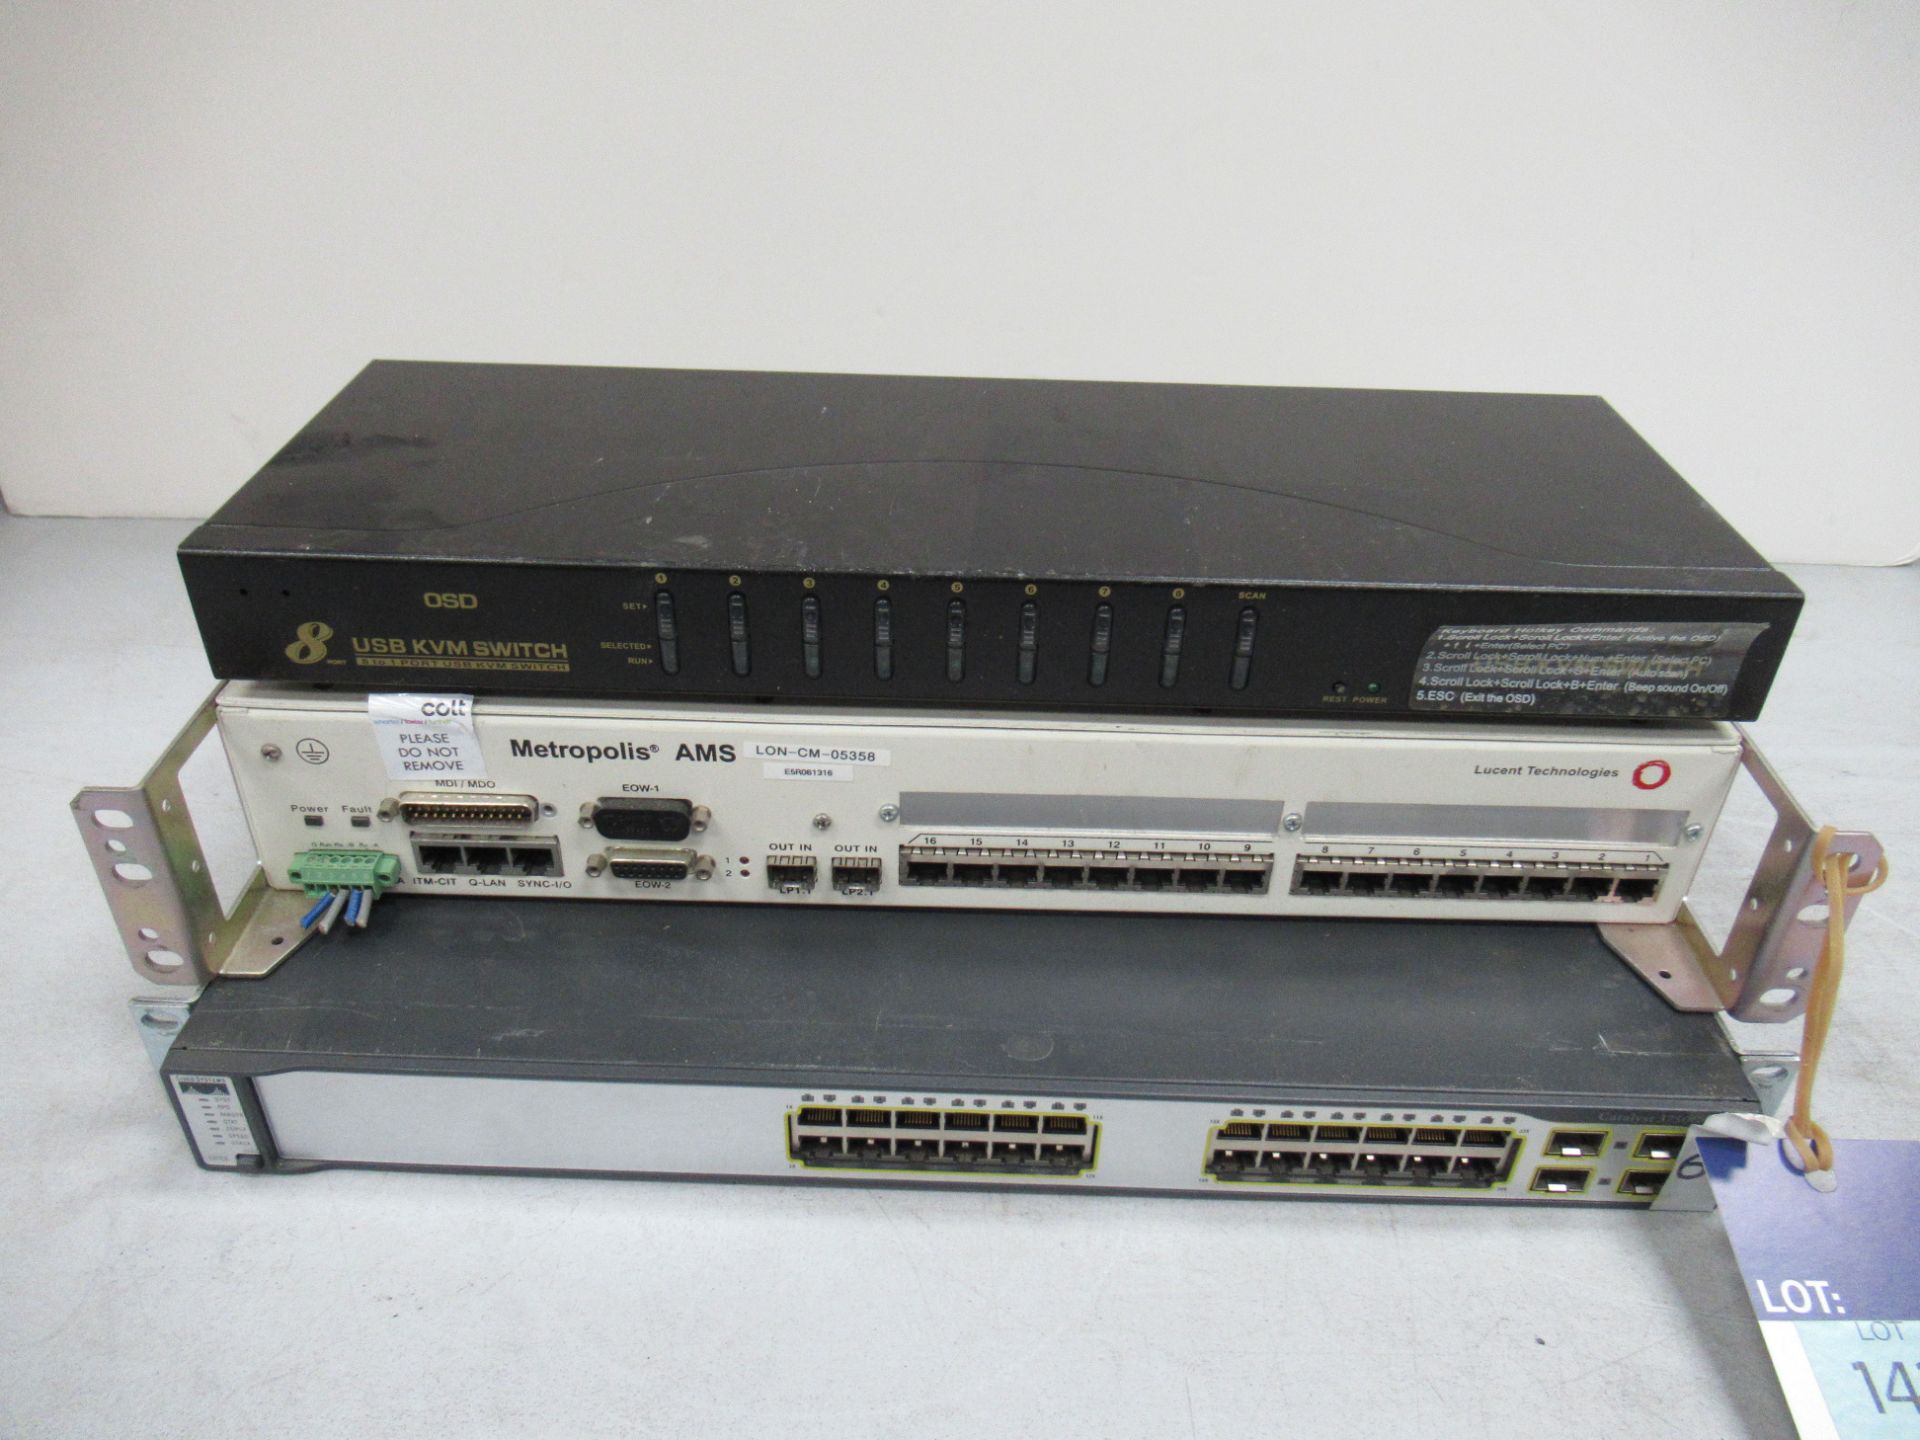 Cisco 3750G 24 Channel Switch Console, Lucent Technologies Metropolis AM 16 Channel Switch Module an